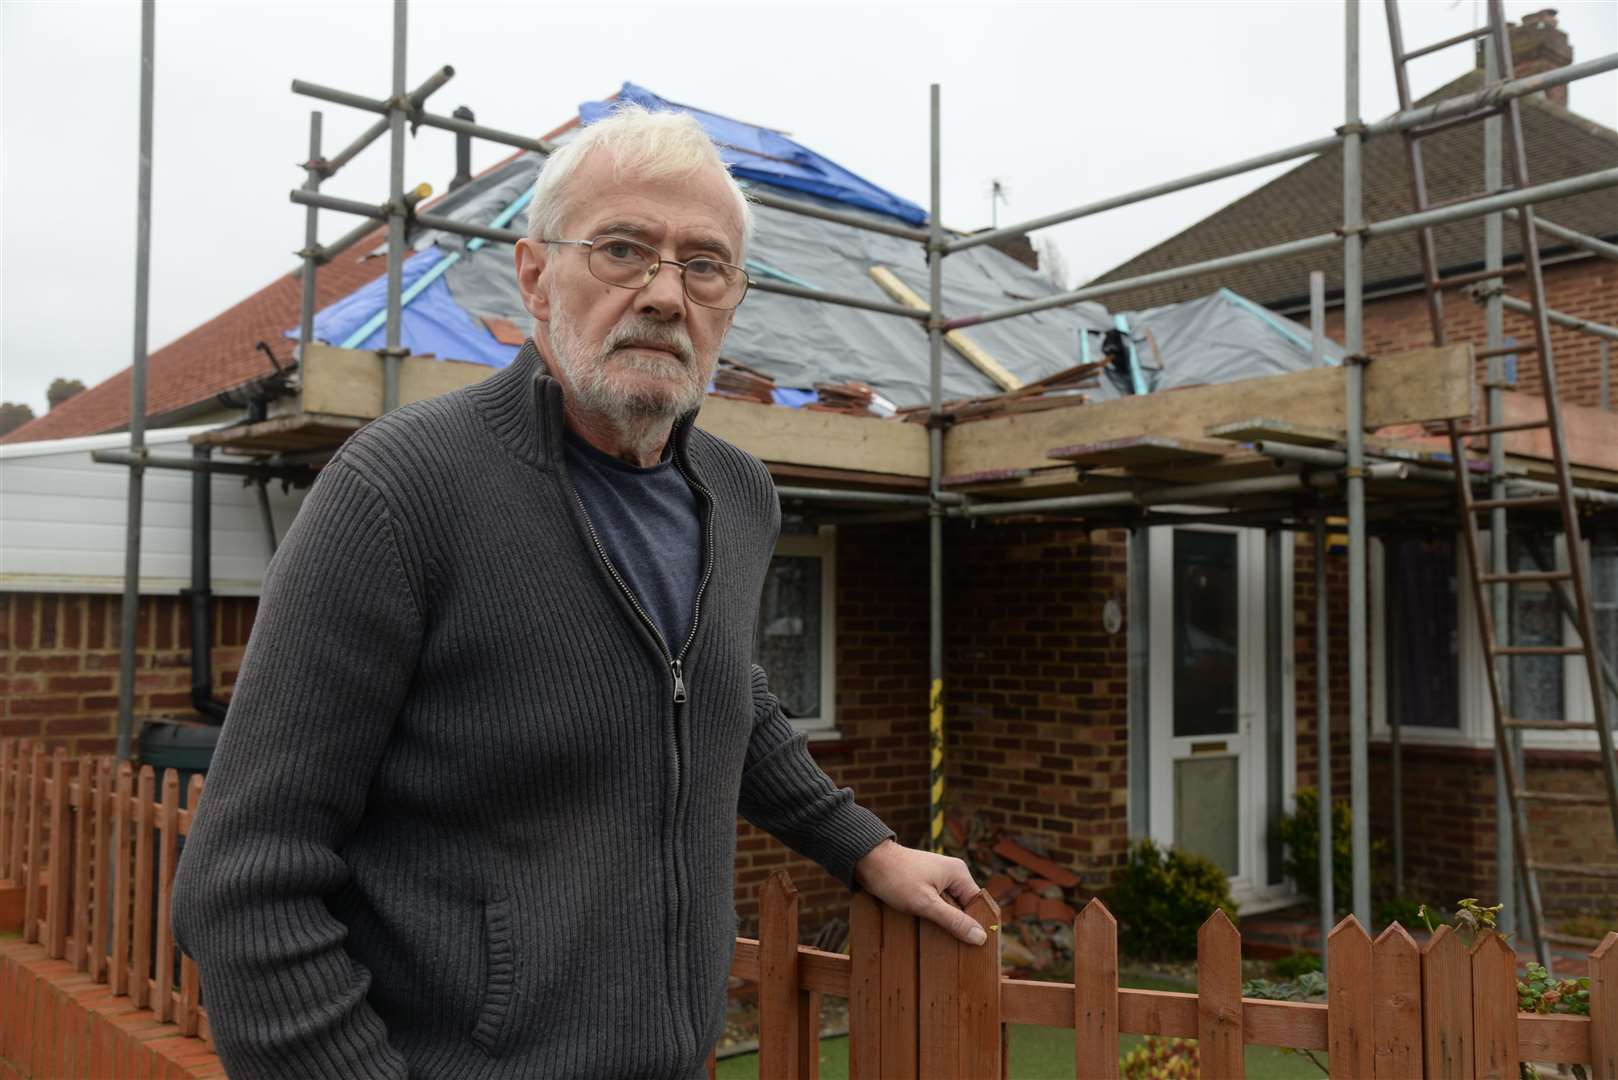 Malcolm Bishop of Strood who was tricked out of £73,000 to repair his roof. Picture: Chris Davey.